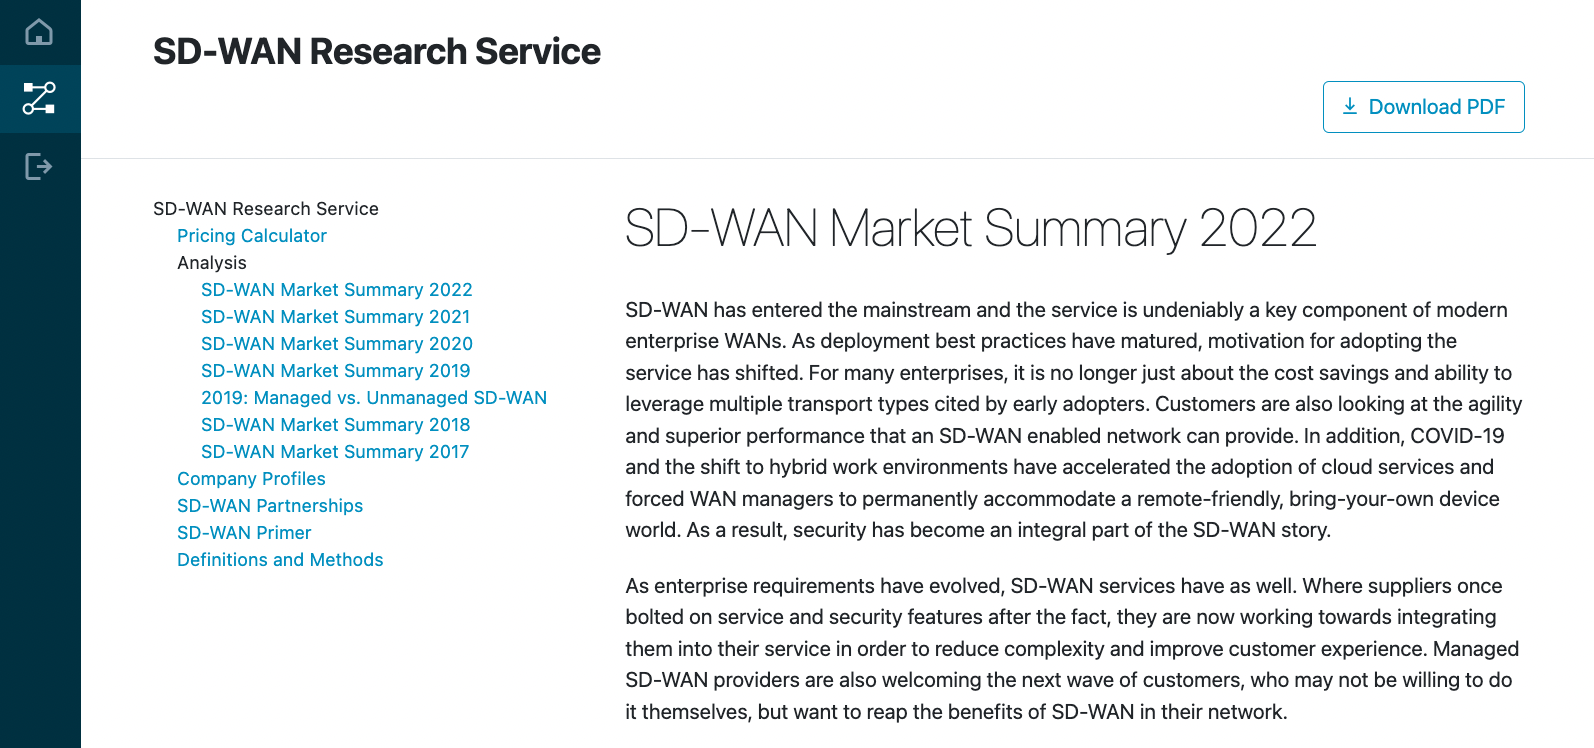 SD-WAN Research Service Product Image